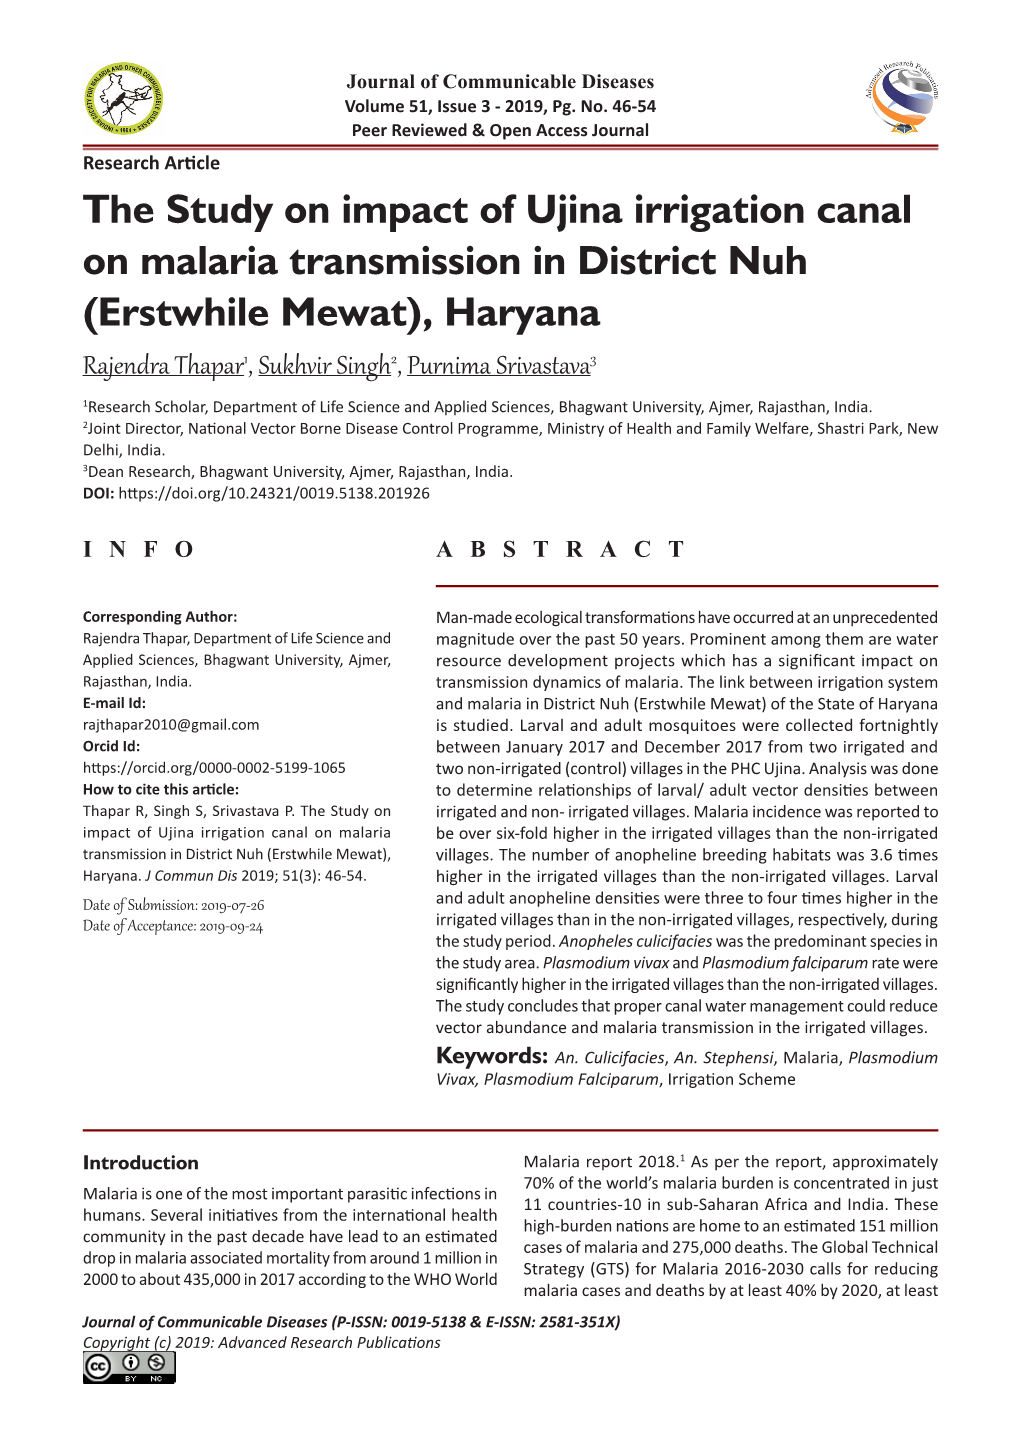 The Study on Impact of Ujina Irrigation Canal on Malaria Transmission In